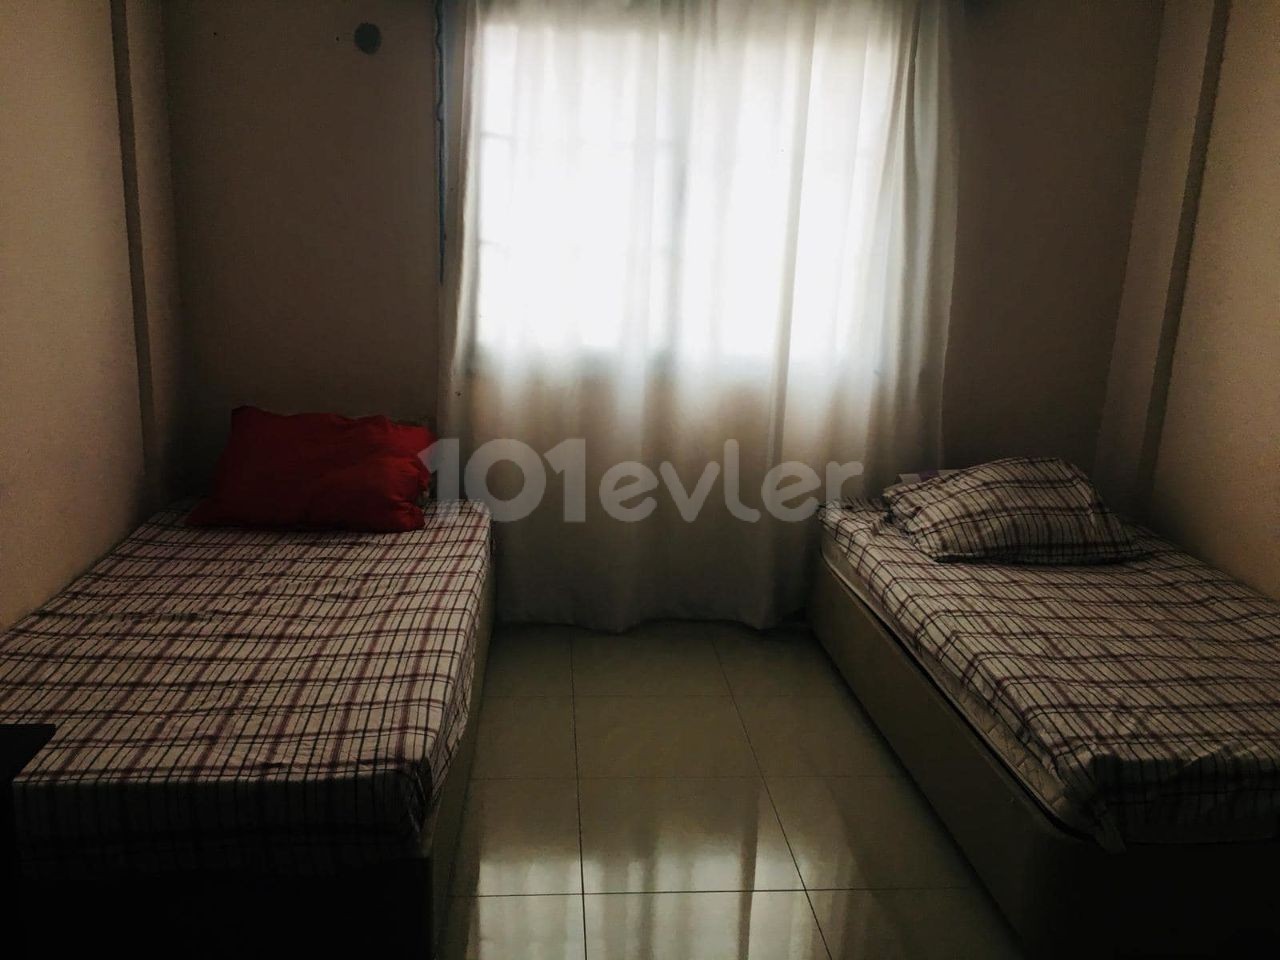 - 2+1 FURNISHED FLAT 2 Minutes from Gönyeli Region School Buses and Markets.